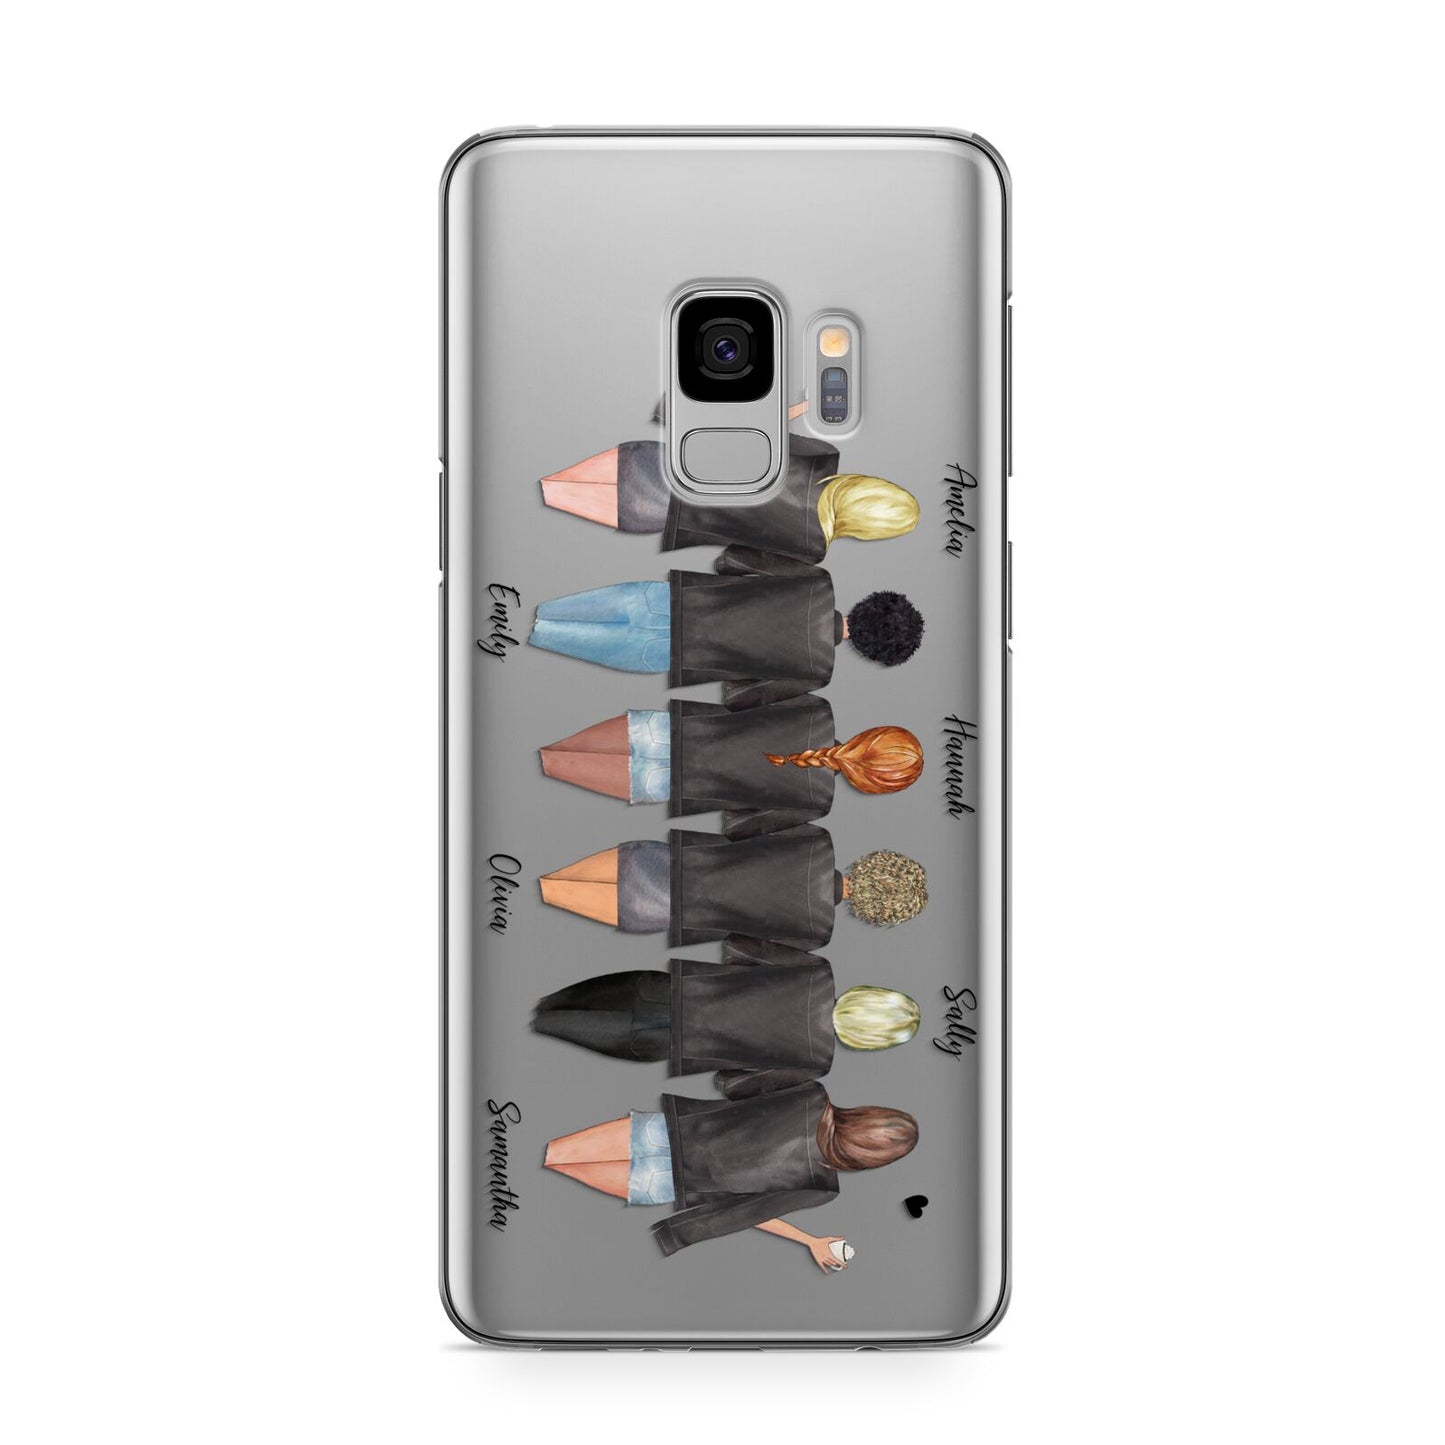 6 Best Friends with Names Samsung Galaxy S9 Case